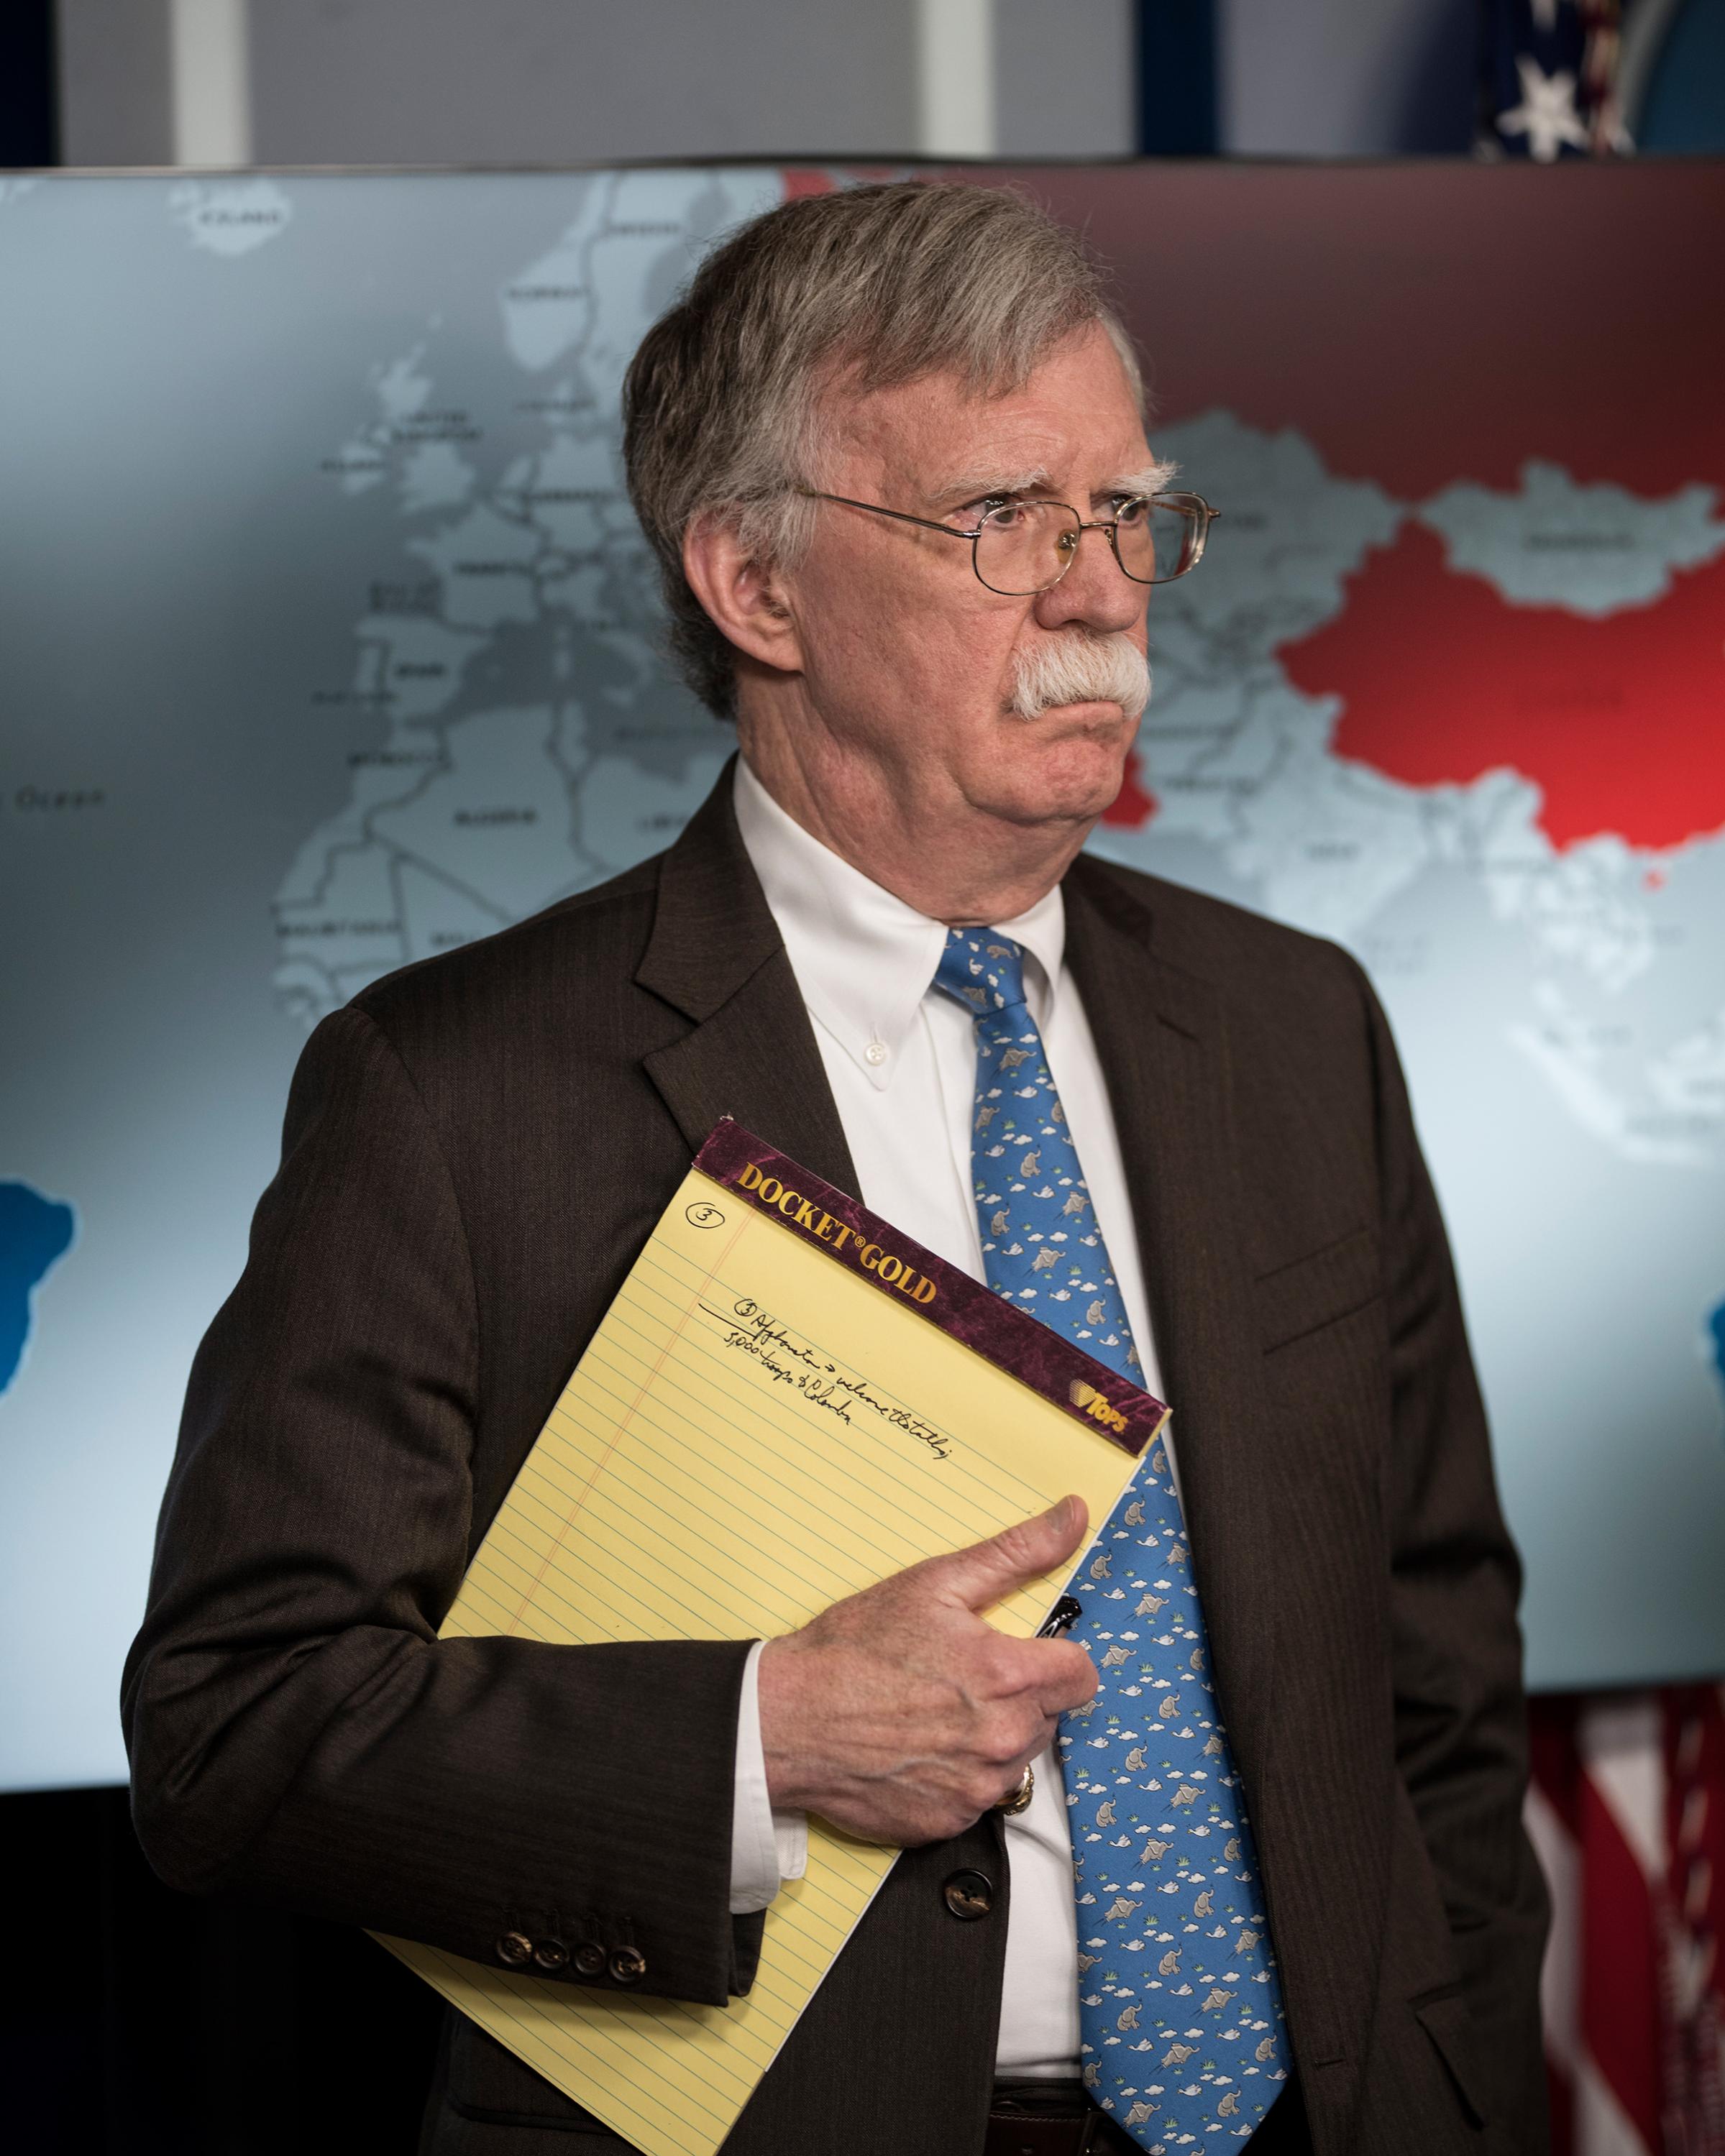 John Bolton holds a yellow legal pad reading "5,000 troops to Colombia."